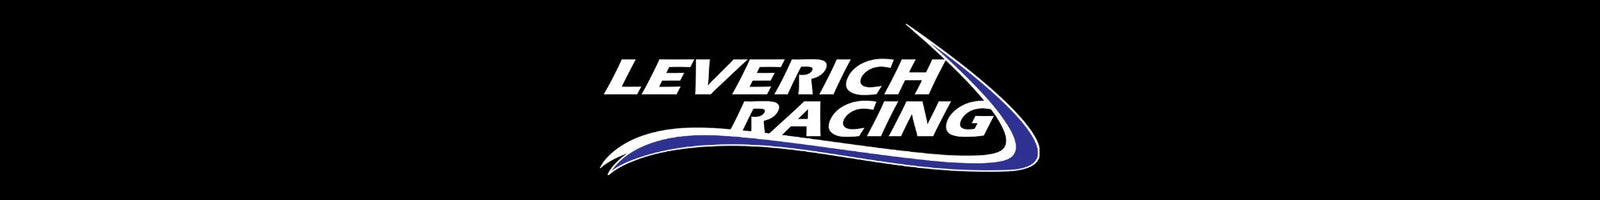 Leverich Racing Store